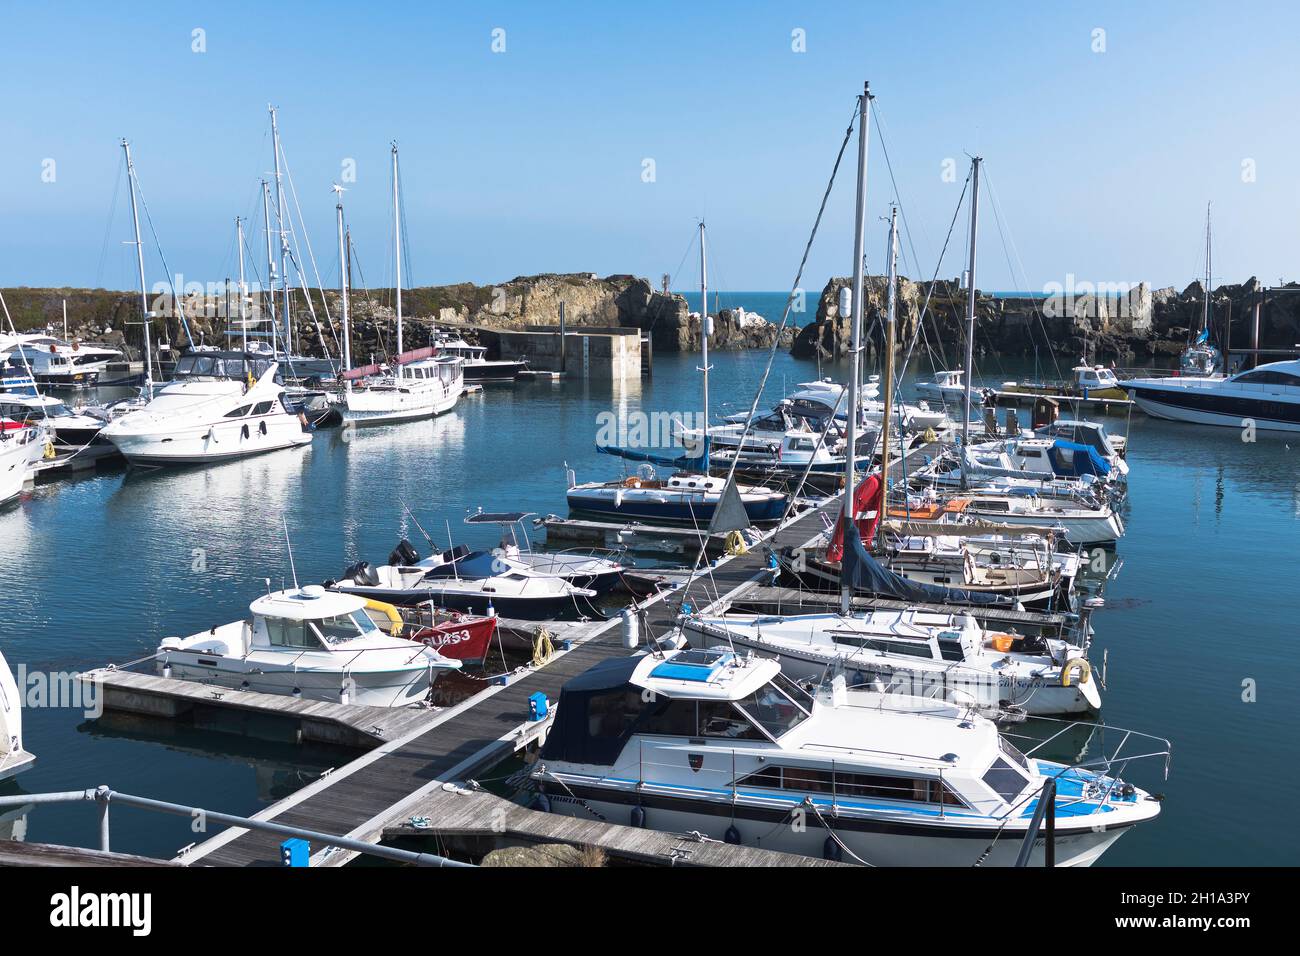 dh Beaucette Marina VAL GUERNSEY Yachts in Hafen Marinas Boote Jachthafen Stockfoto